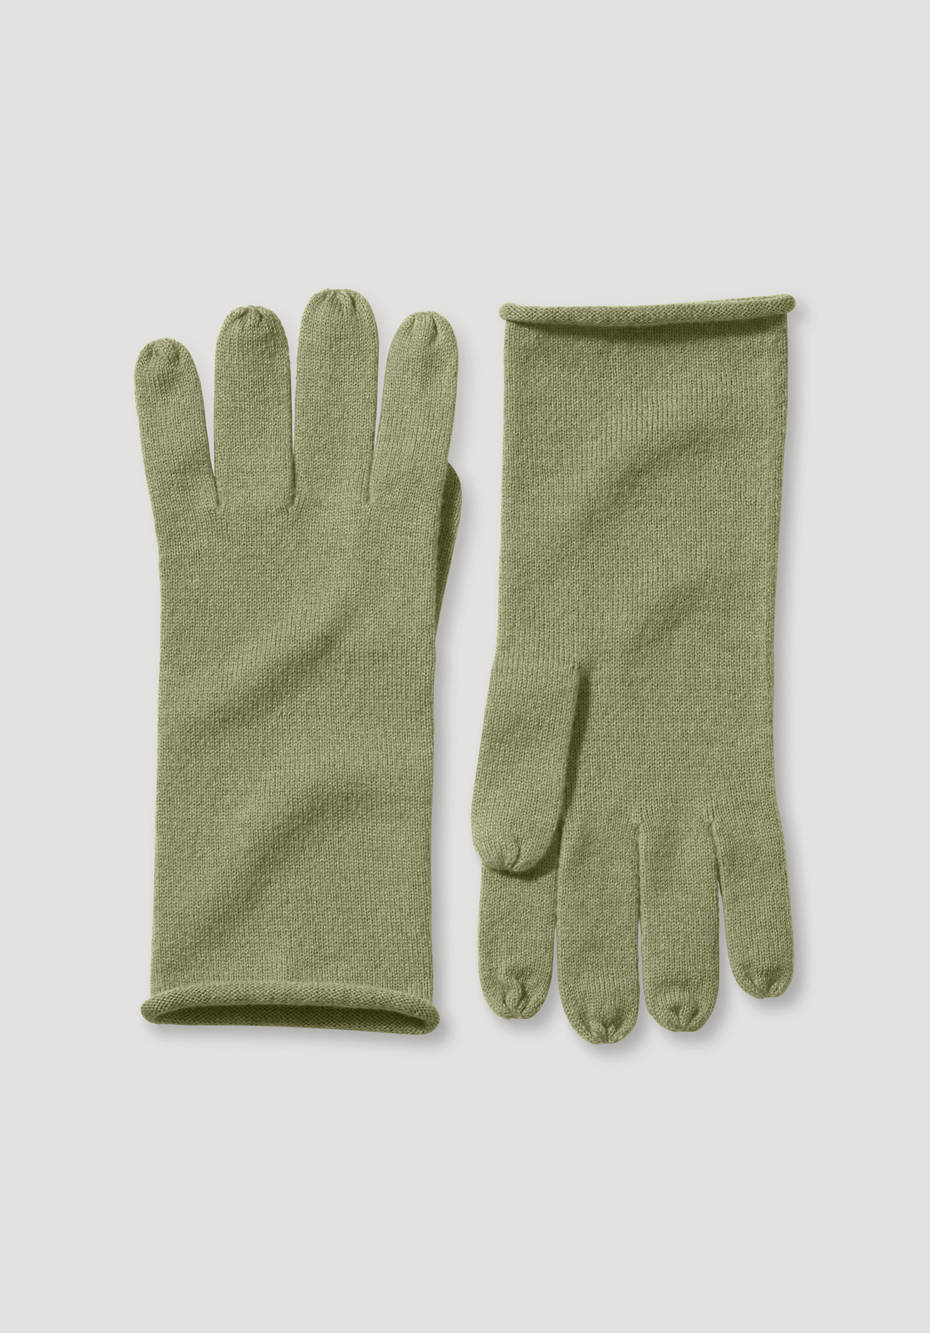 New wool gloves with cashmere